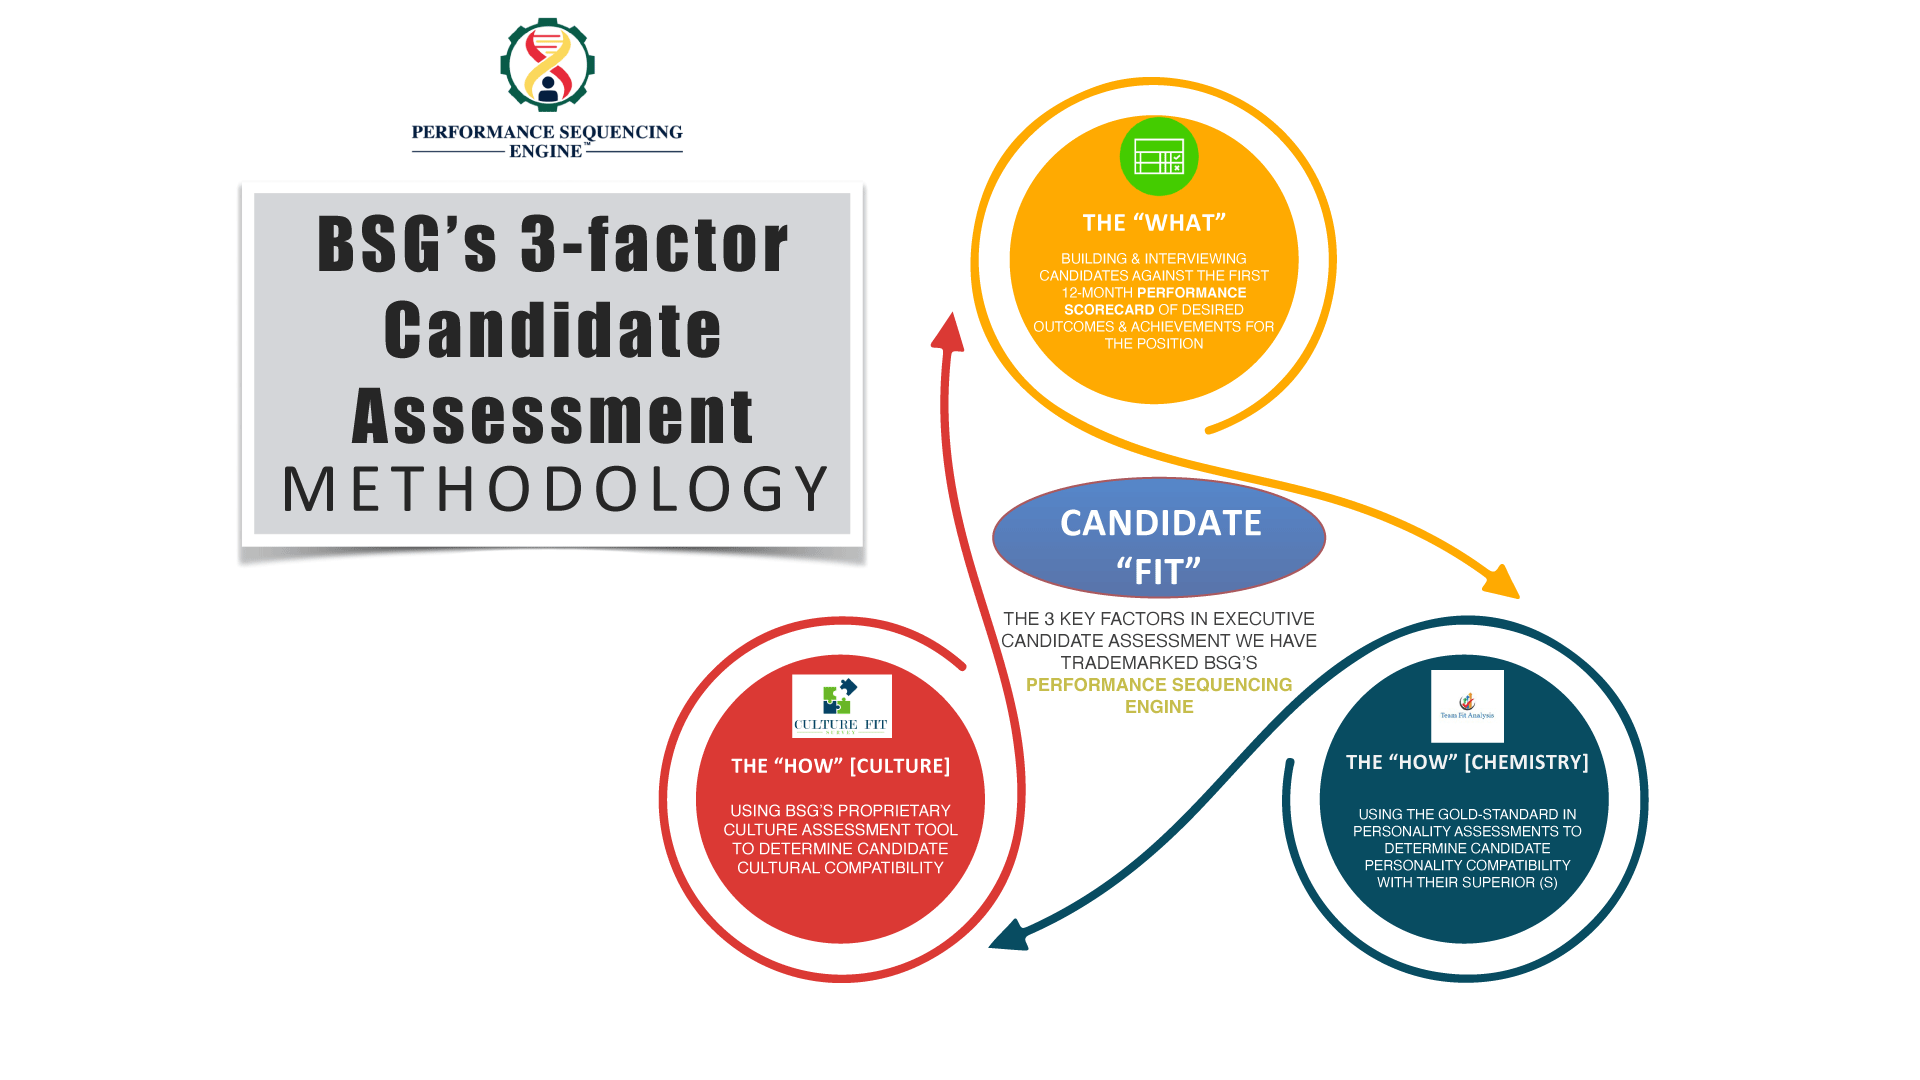 BSG-Assessment-triad--3-factor-authentication,-Performance-Sequencing-Engine-graphic